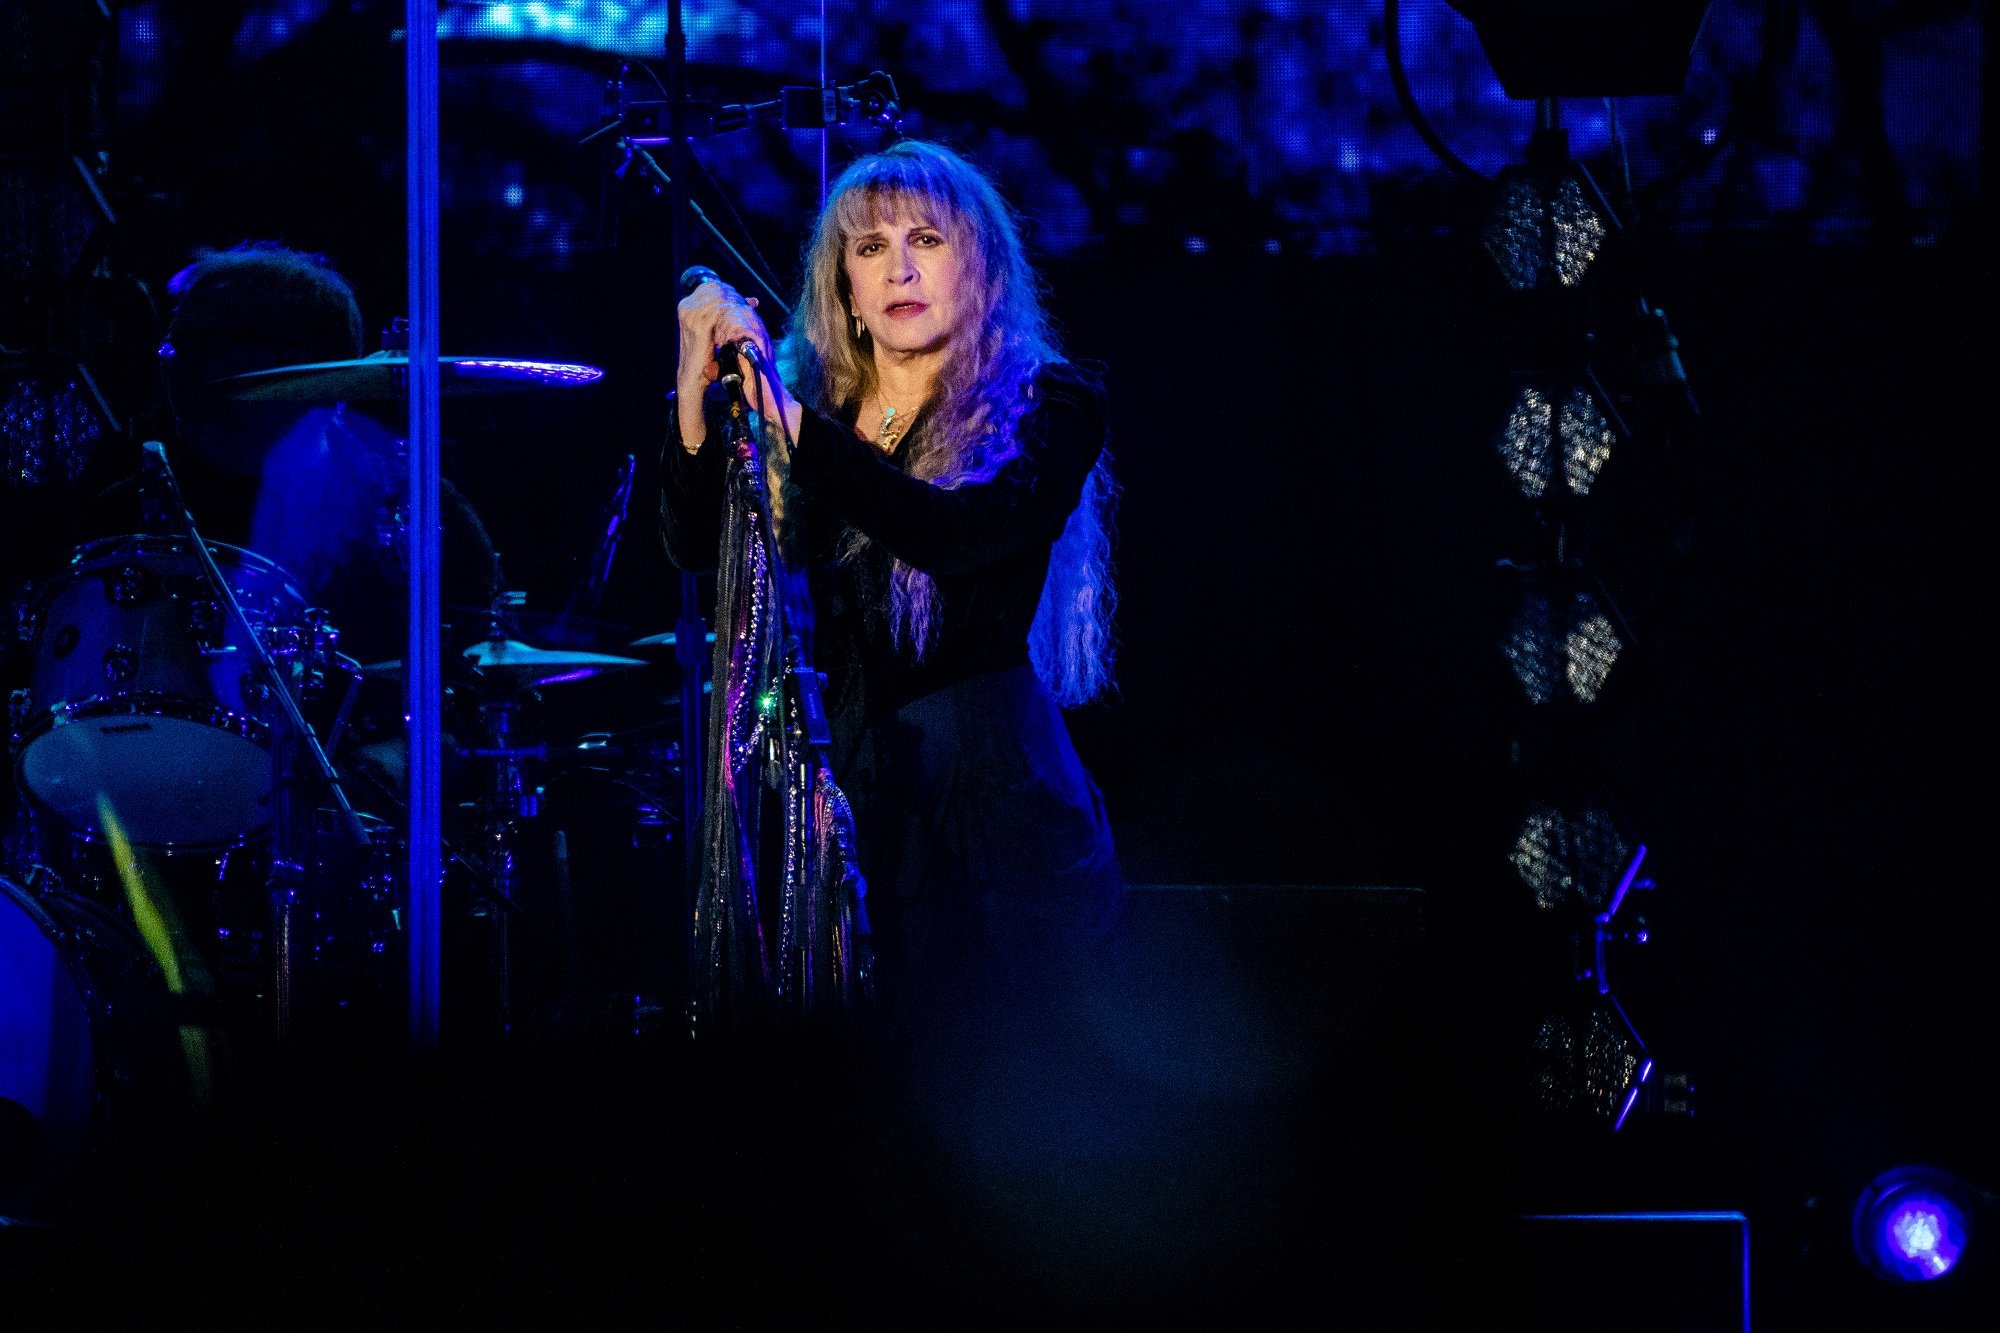 Stevie Nicks stands on stage holding a microphone stand